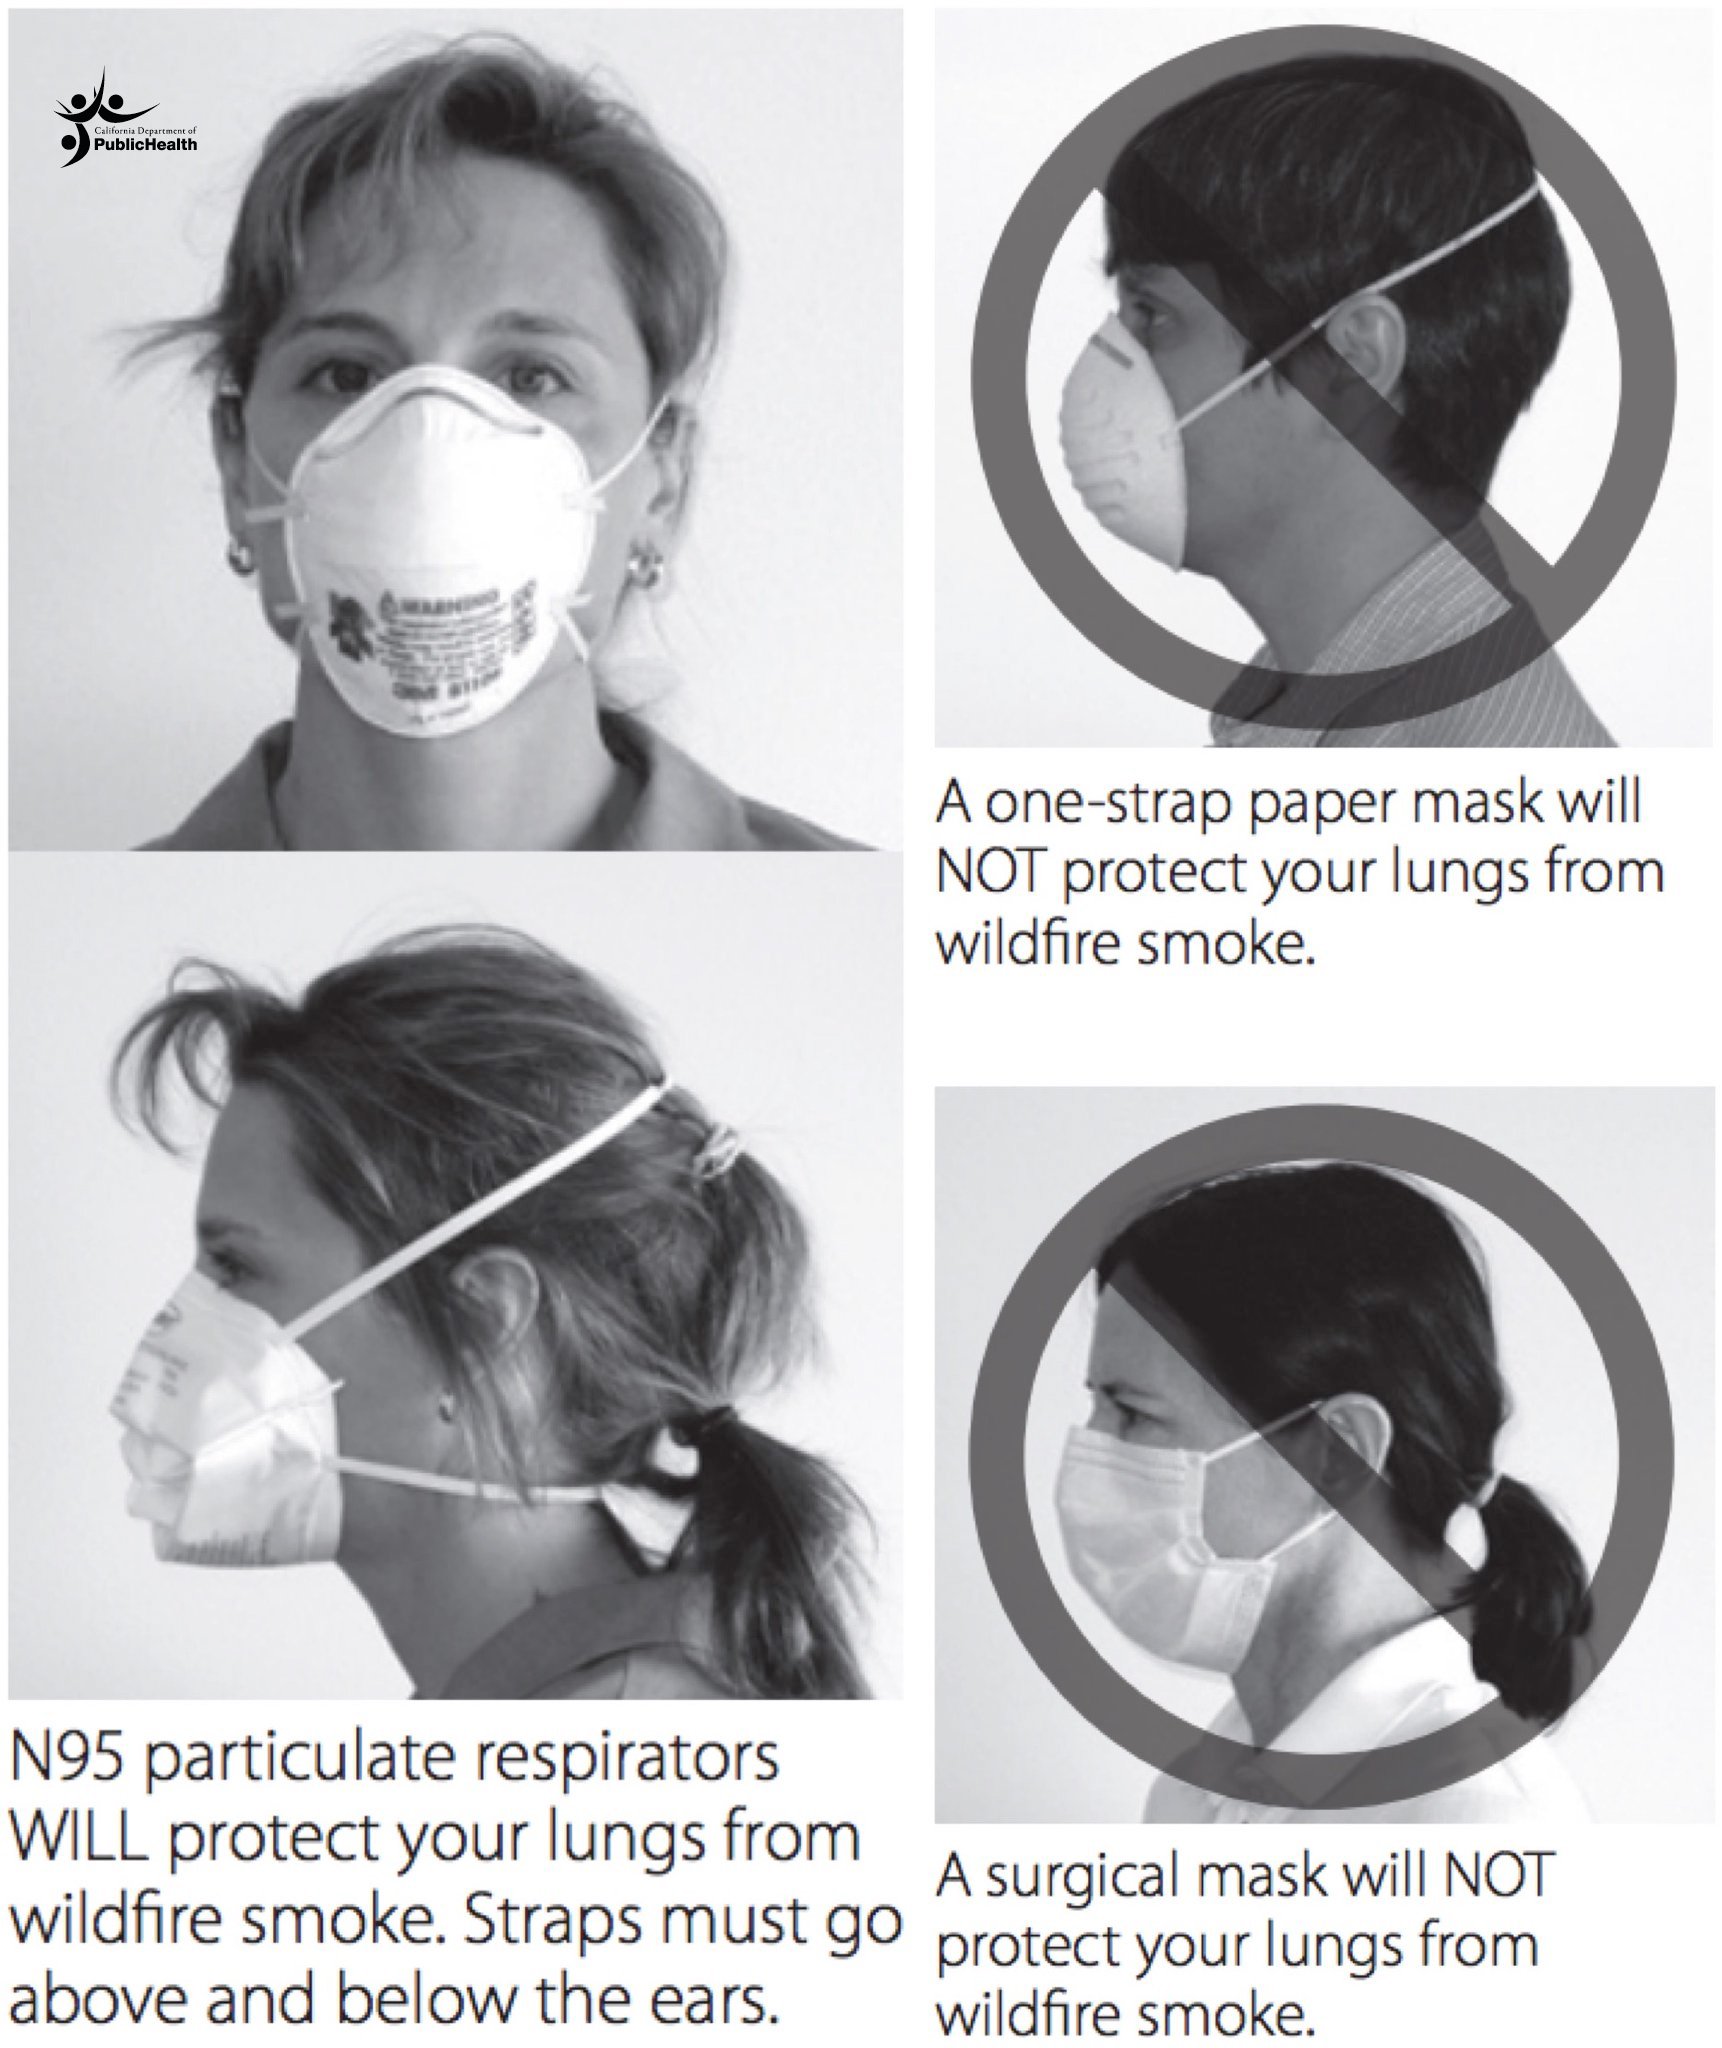 How to wear n95 mask